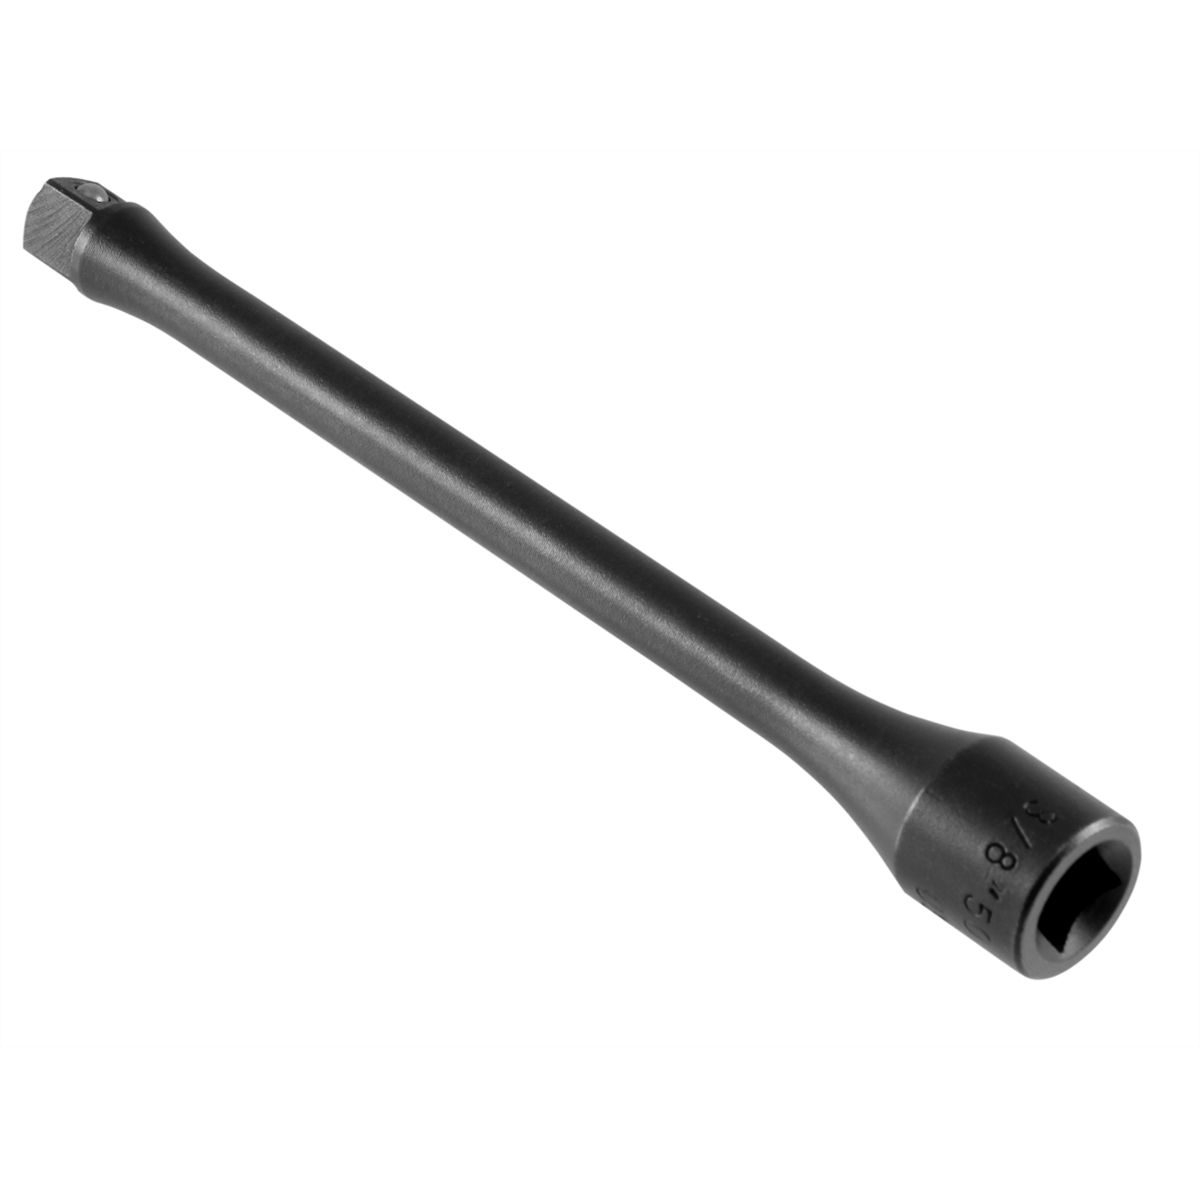 3/8 Inch Drive Torque Stick Extension C 50 ft-lbs...